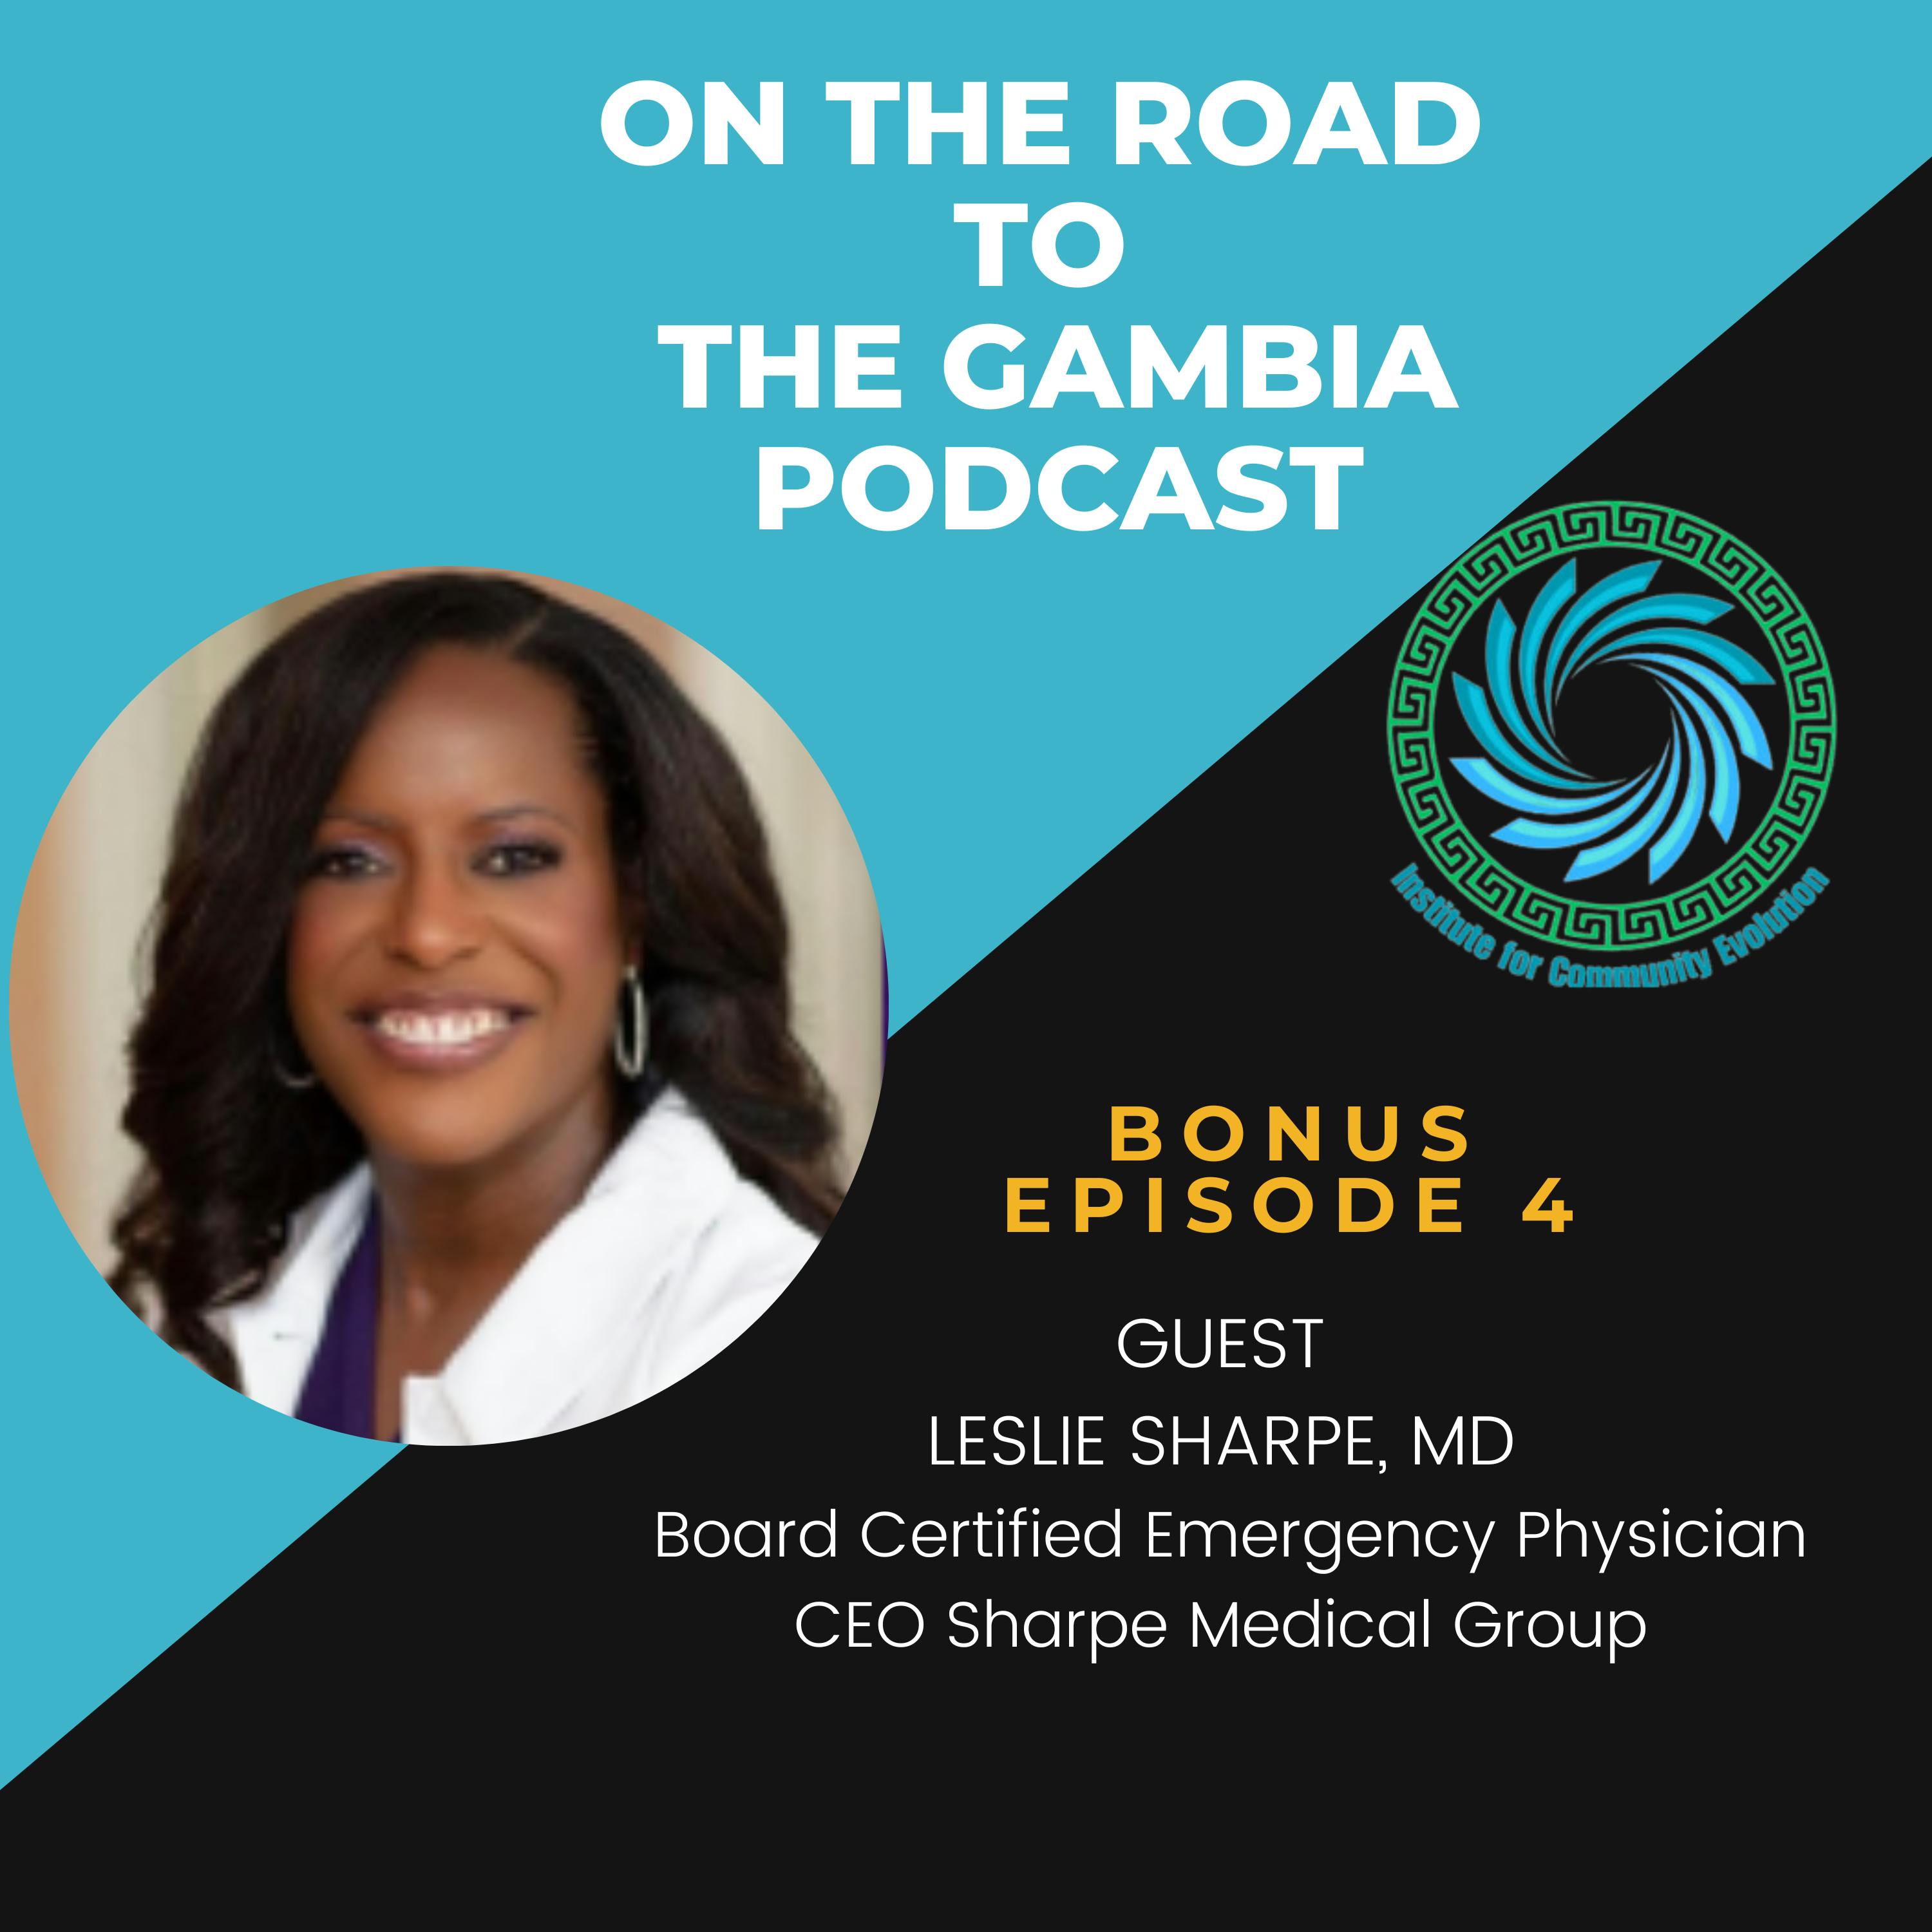 From Emergency Rooms to The Gambia: Dr. Leslie Sharpe’s Journey to Make a Difference